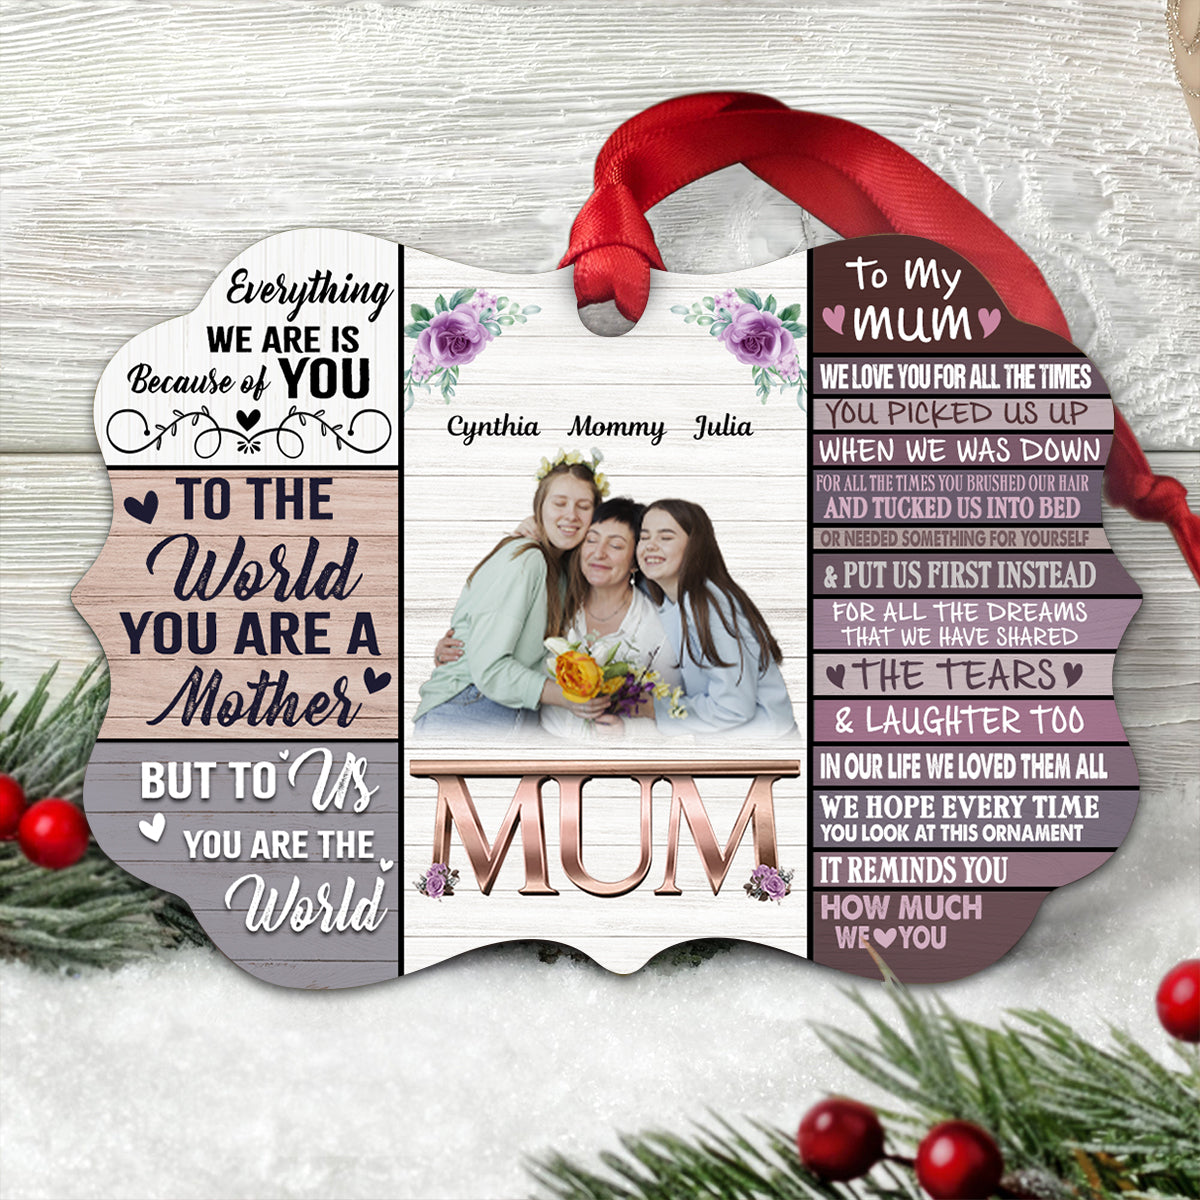 We Love You For All The Times - Personalized Photo Custom Shape Ornament - Gift For Mother, Grandma